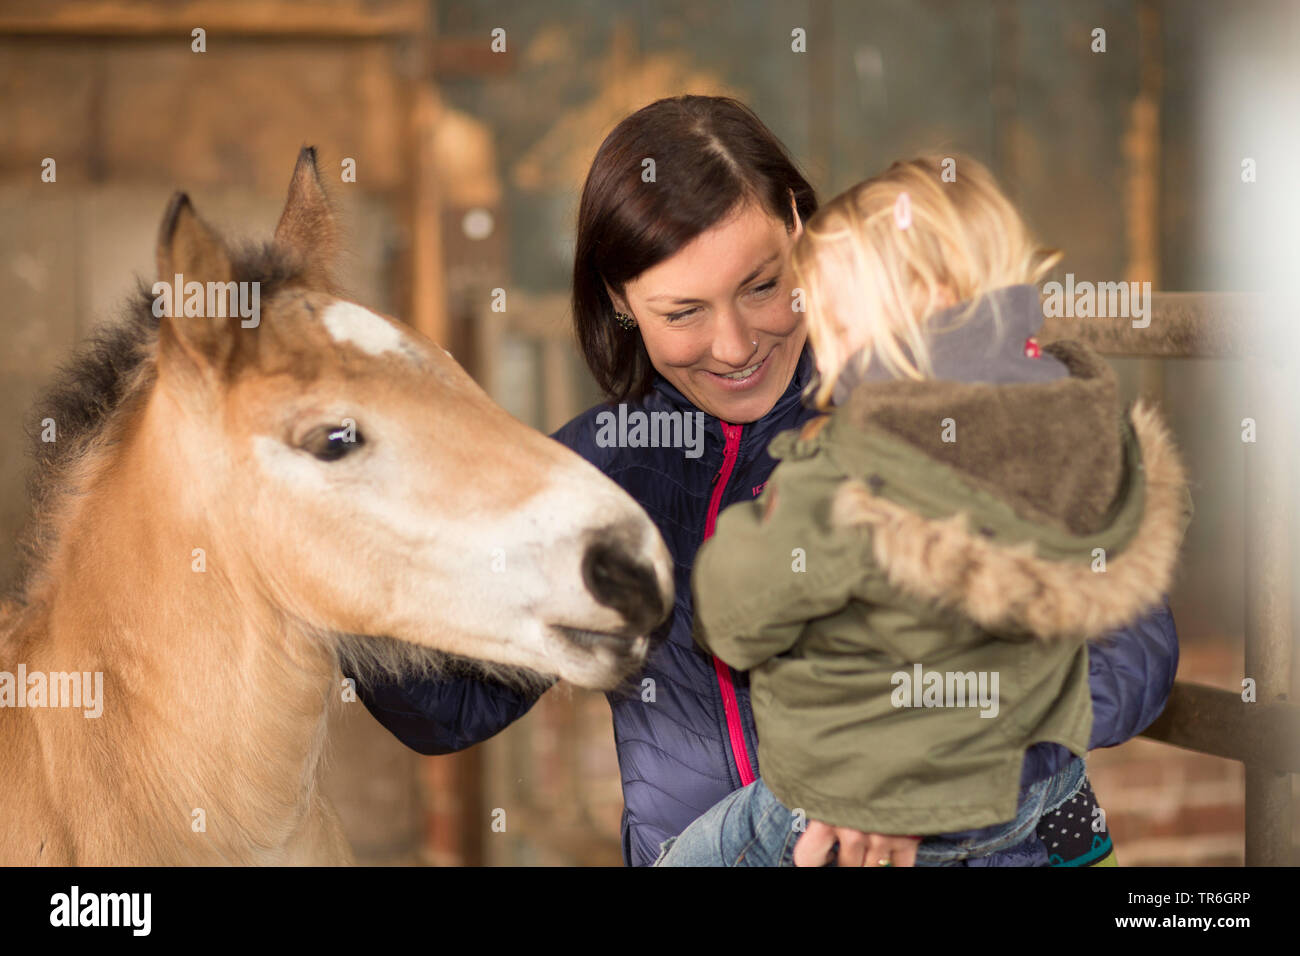 domestic horse (Equus przewalskii f. caballus), mother with a little girl on arm visiting a foal in a stable, Germany Stock Photo